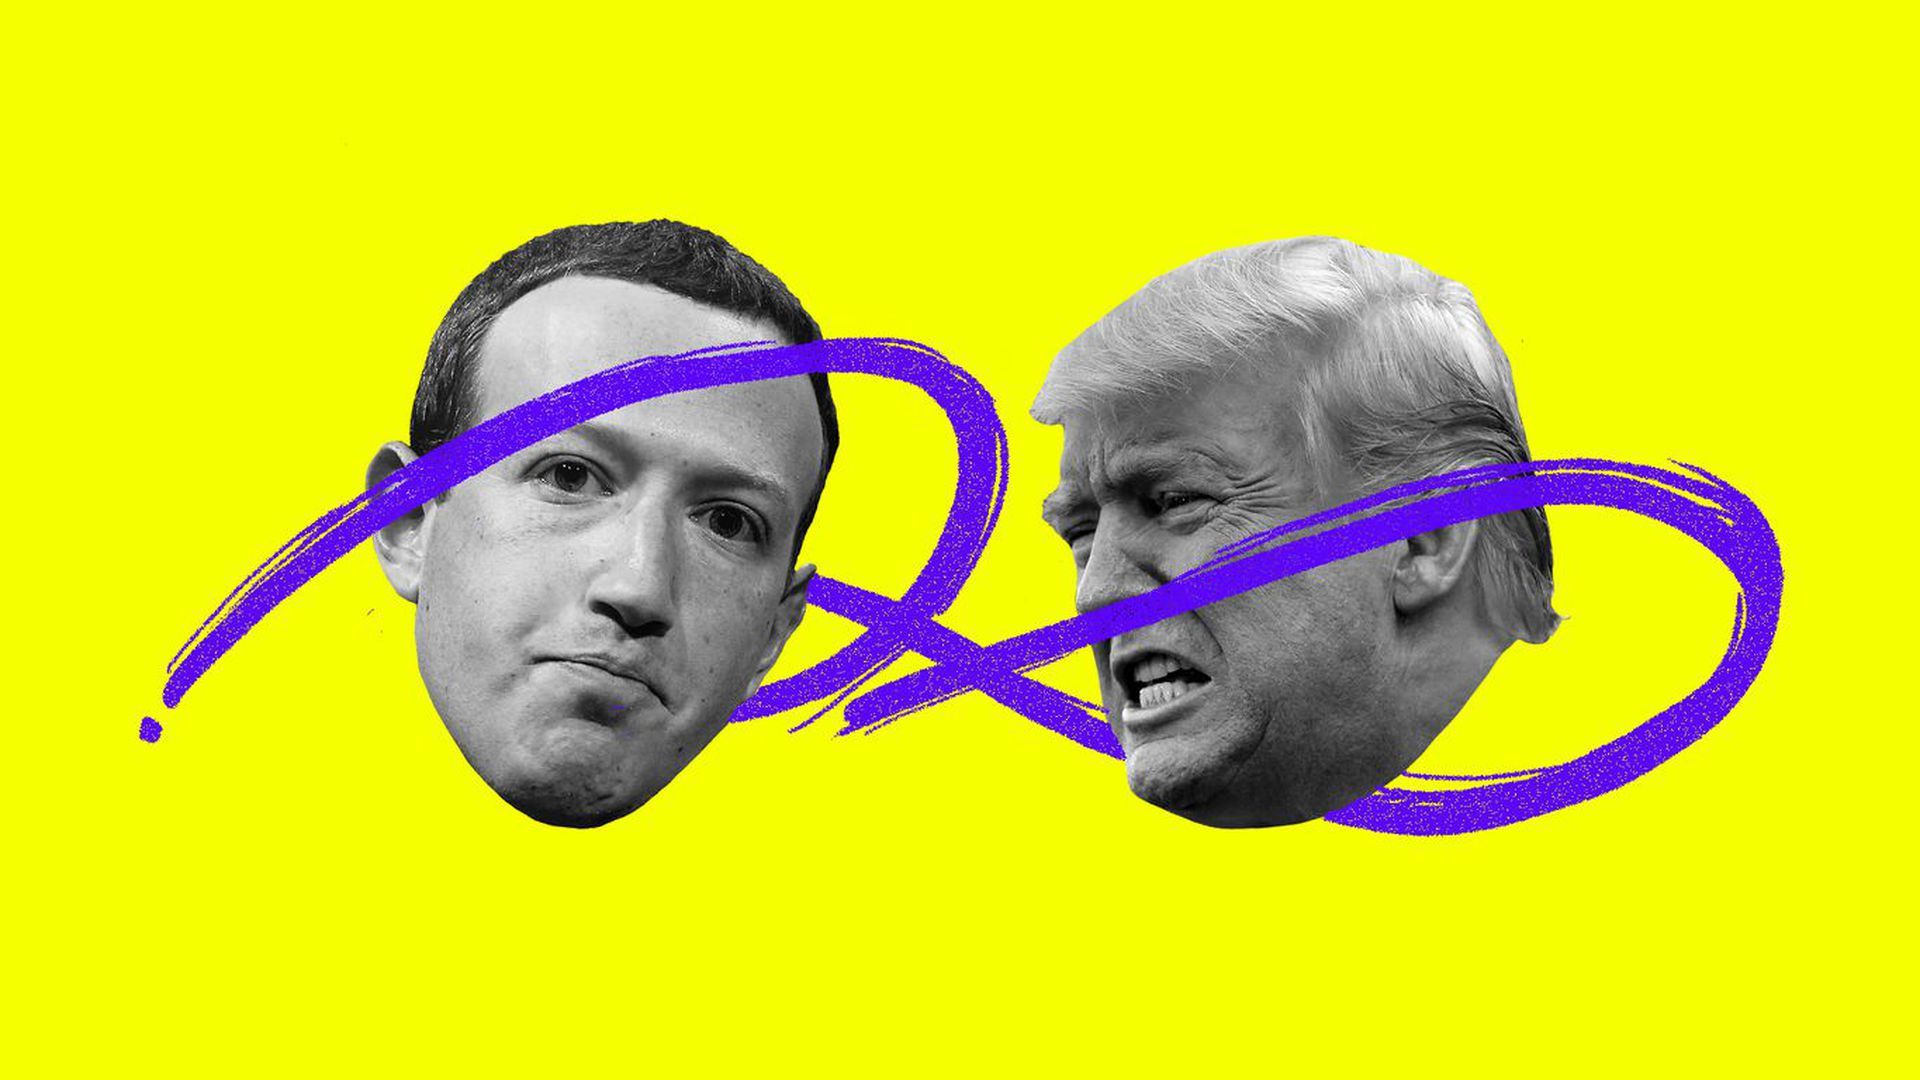 An illustration of Mark Zuckerberg and Donald Trump with Xs and Os a la a football playbook